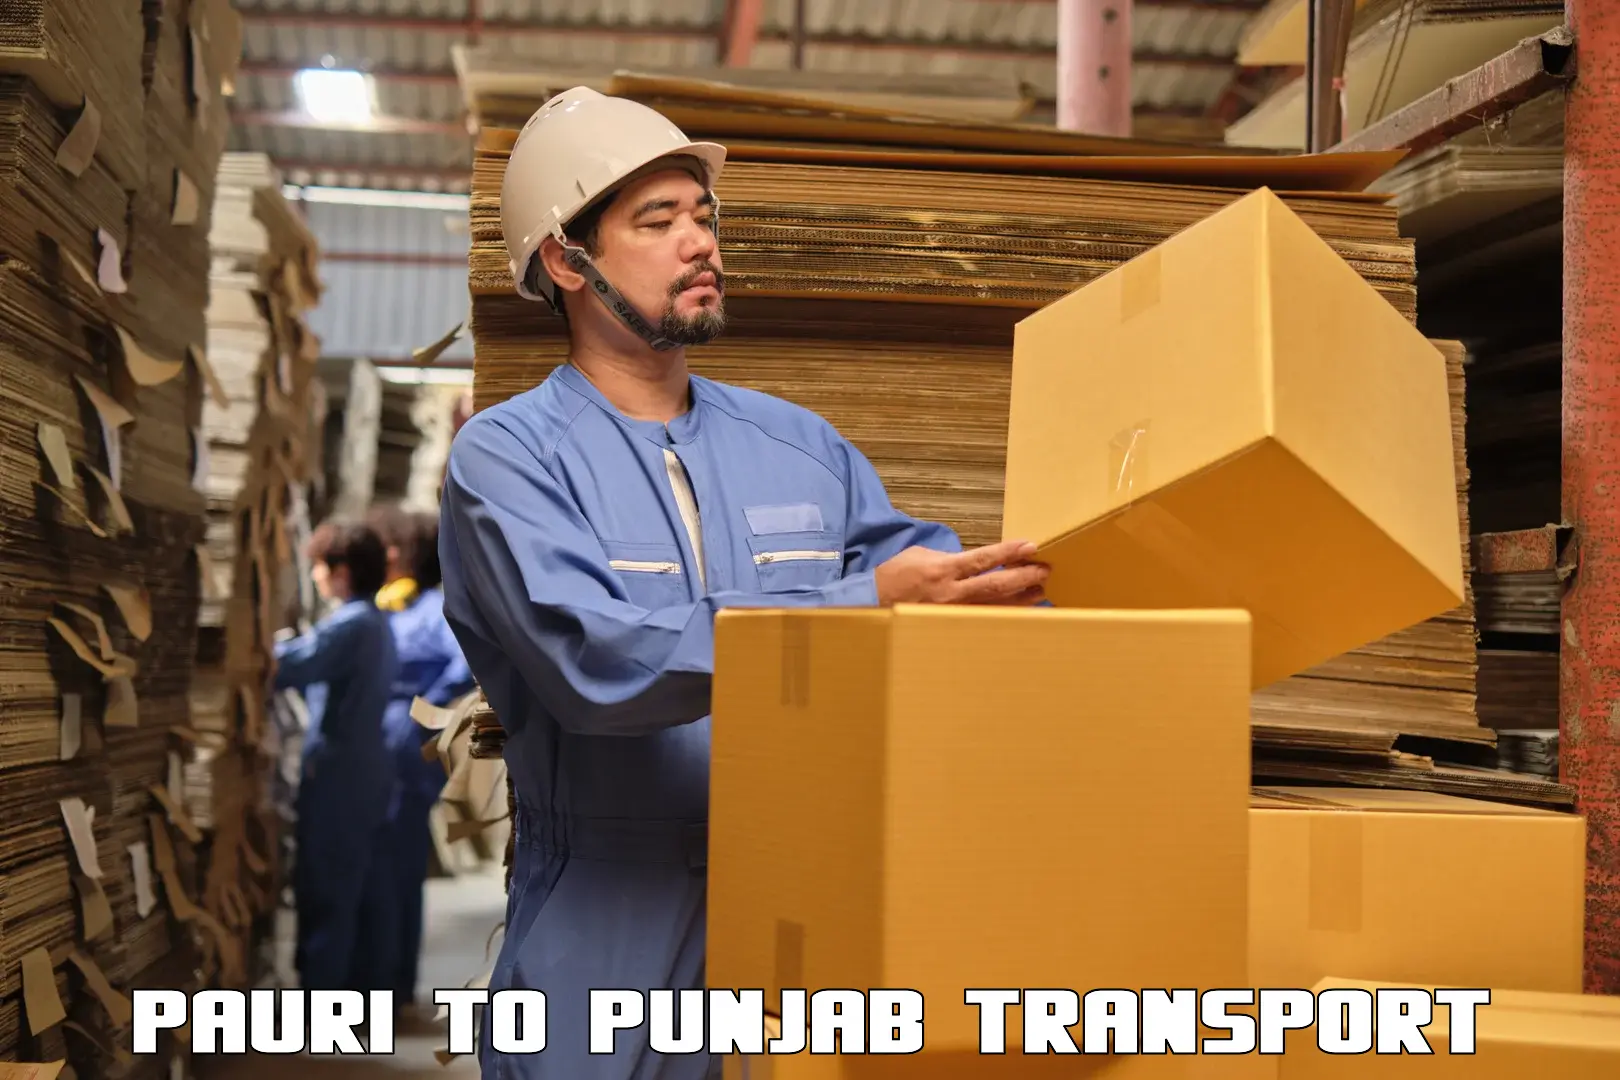 Cargo transportation services in Pauri to Goindwal Sahib